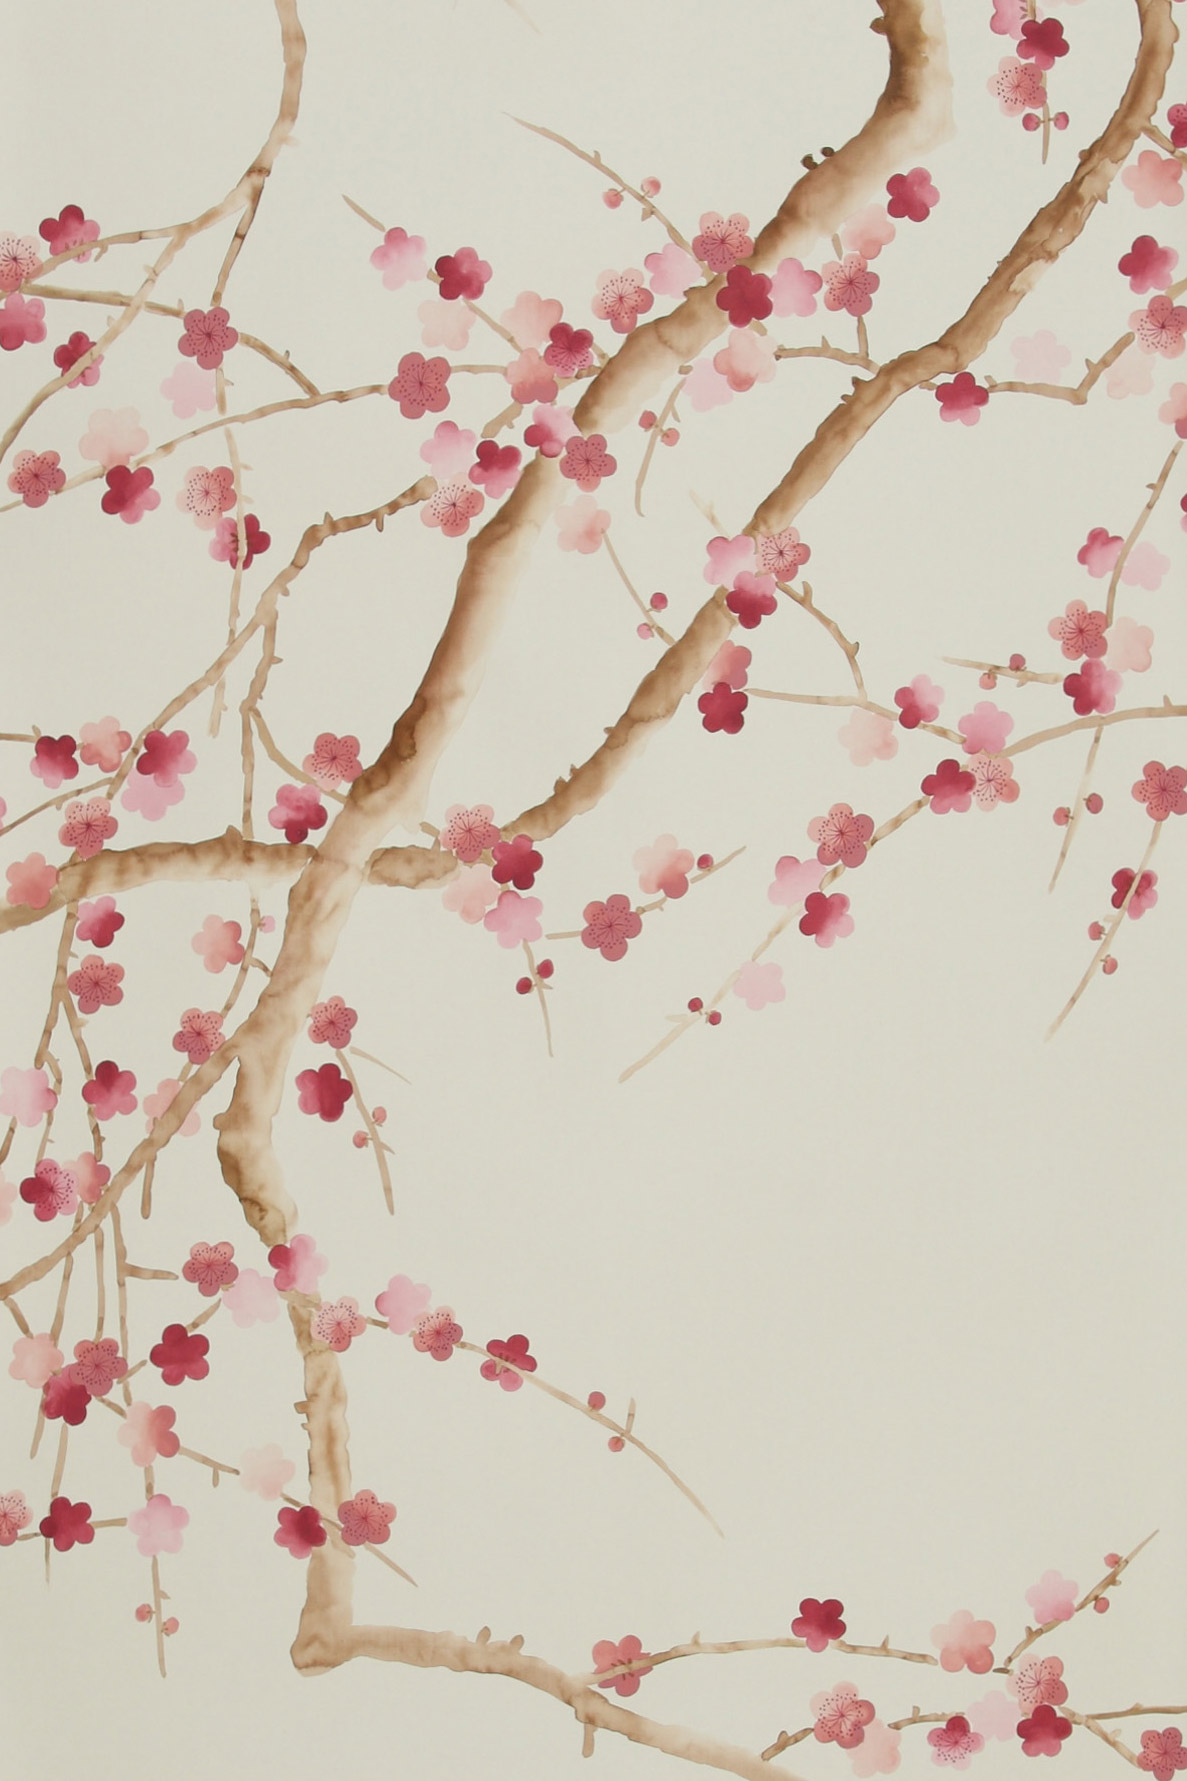 'Plum Blossom' in Blossom design colours on Satin Grey dyed silk